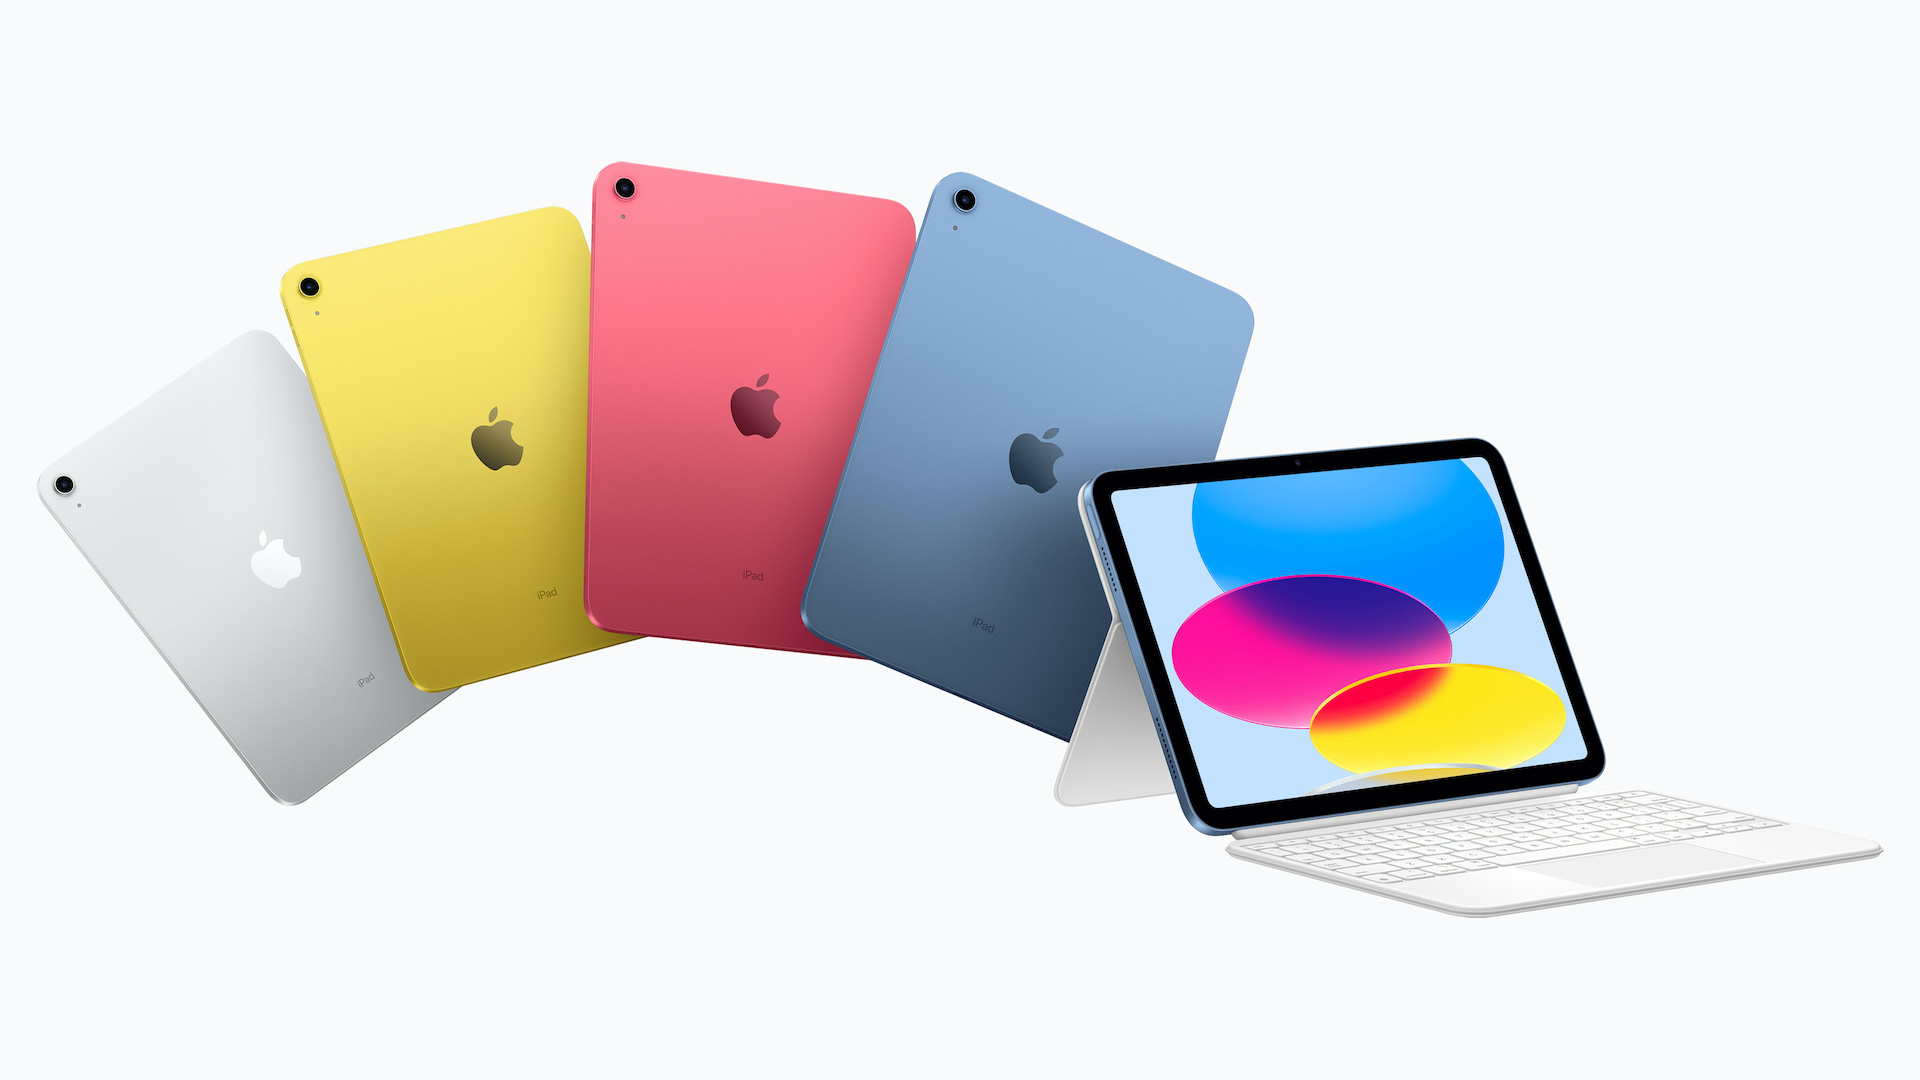 Introducing four vibrant colors for the completely redesigned iPad